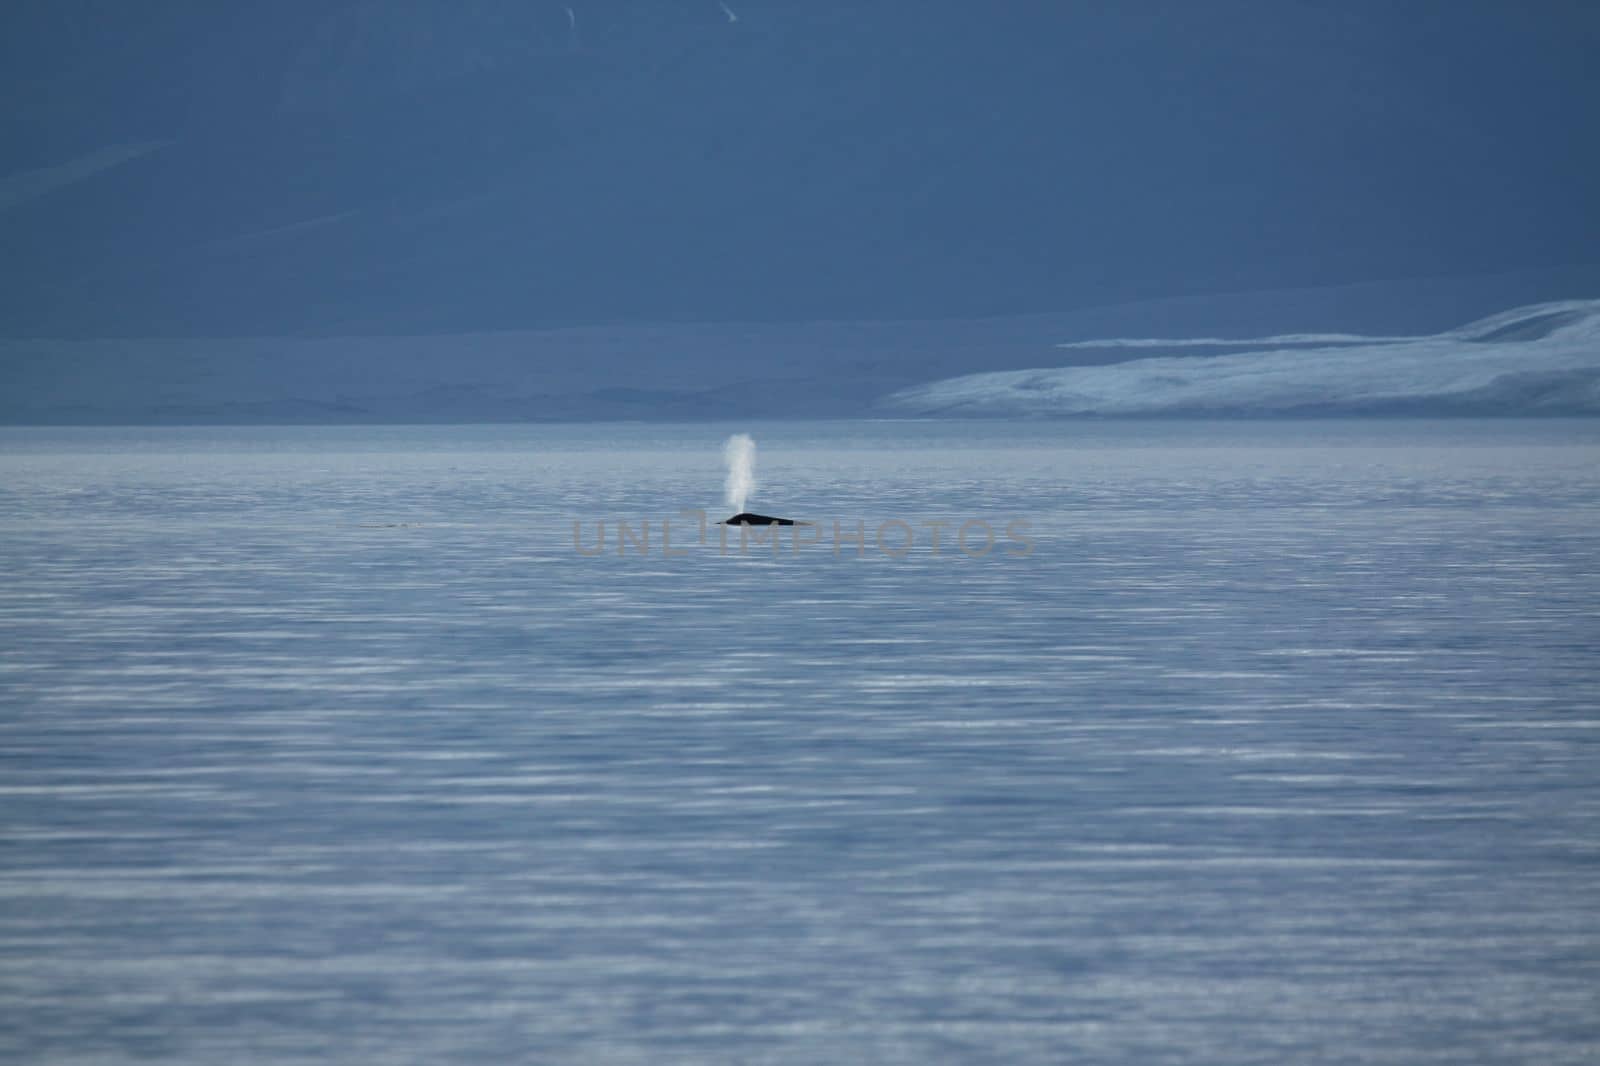 Whales blowing near Pond Inlet, Nunavut by Granchinho